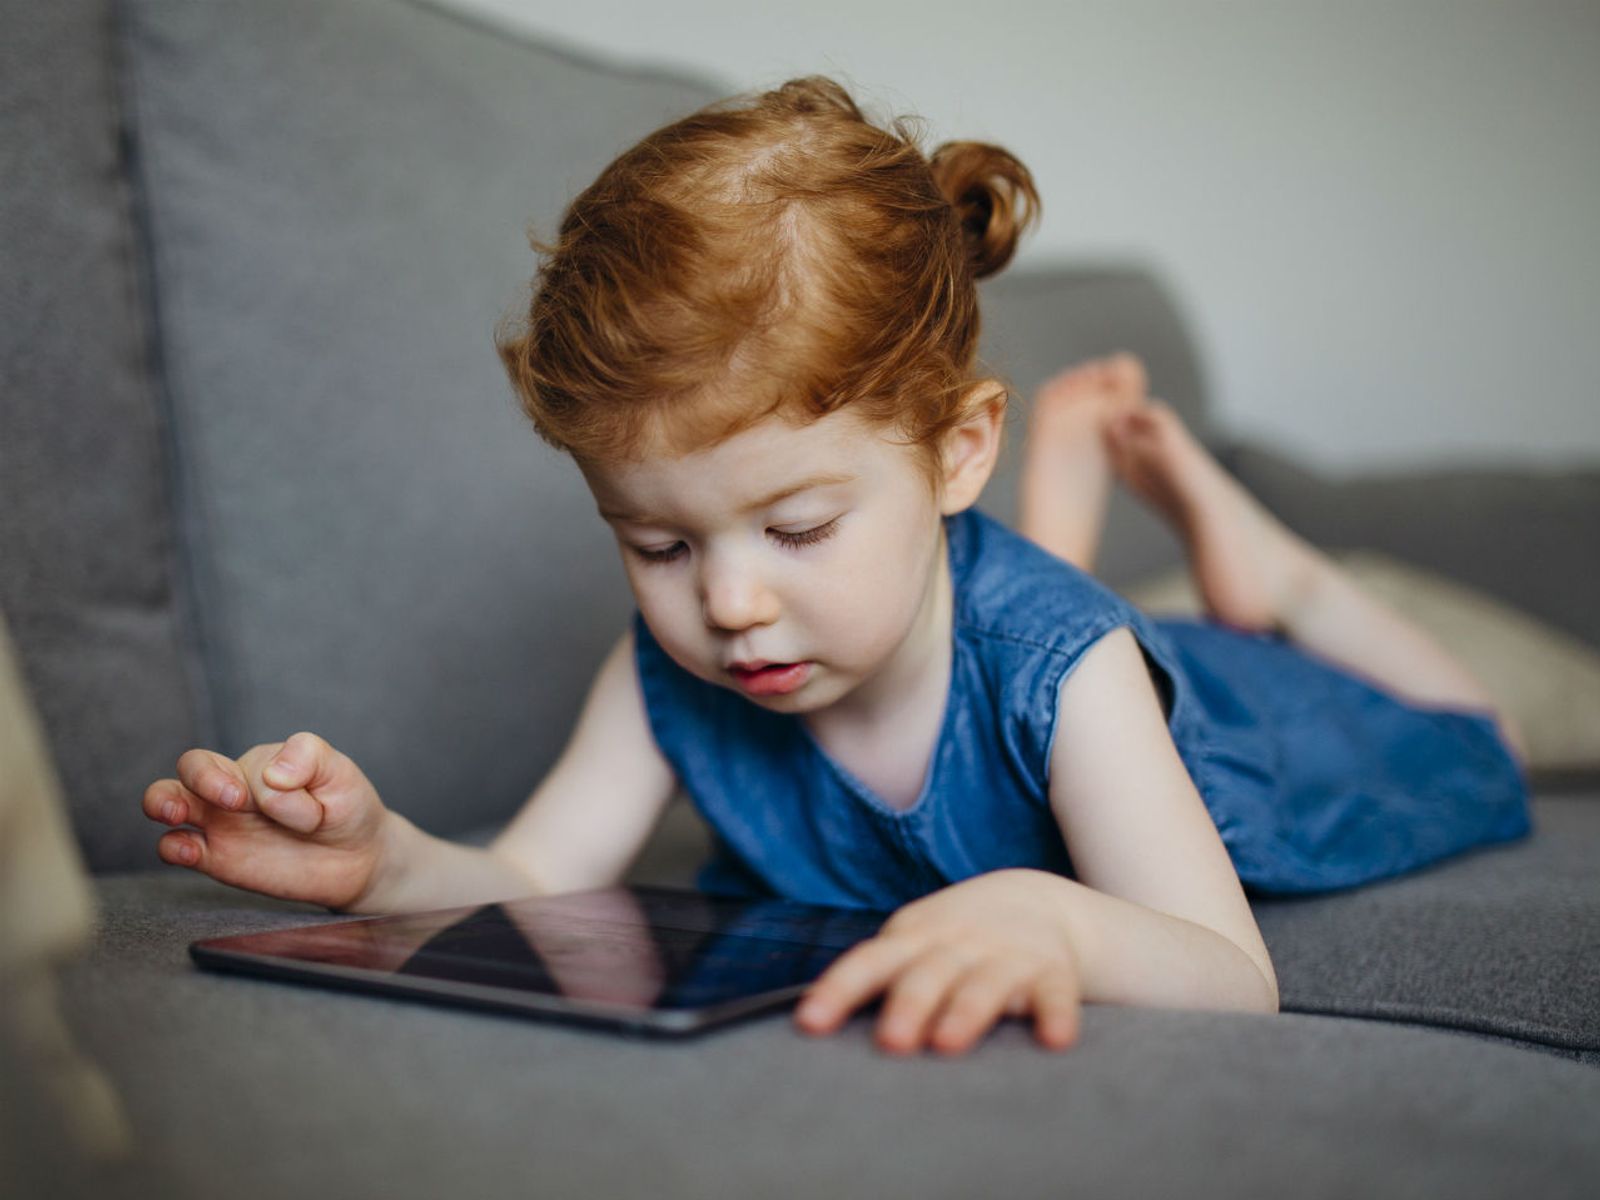 How To Childproof Your Android And Make It Kid Friendly